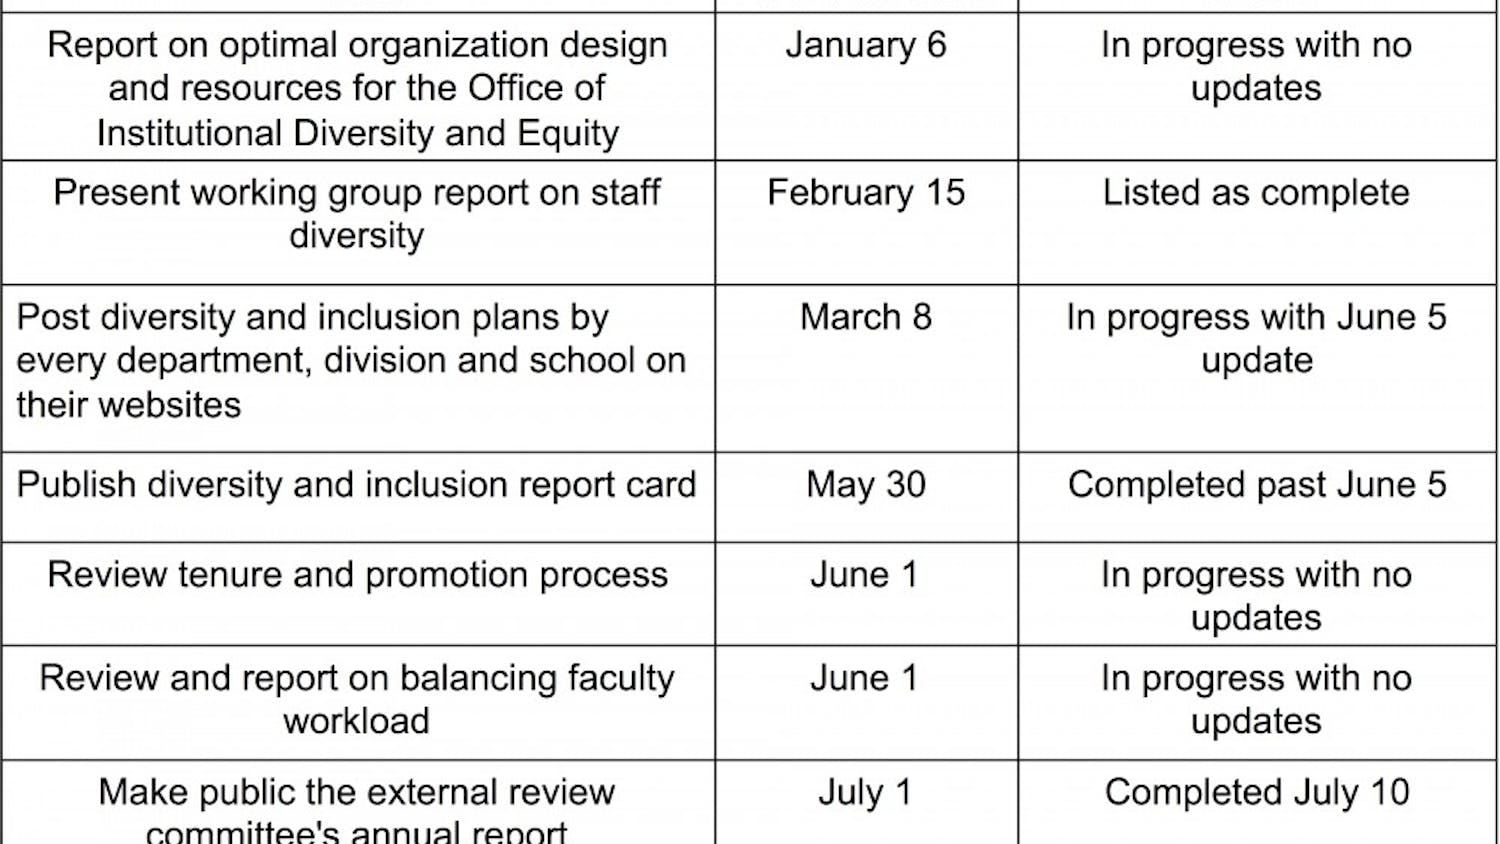 A chart depicting action plan tasks with 2017 deadlines and statuses according to the Inclusive Excellence website.